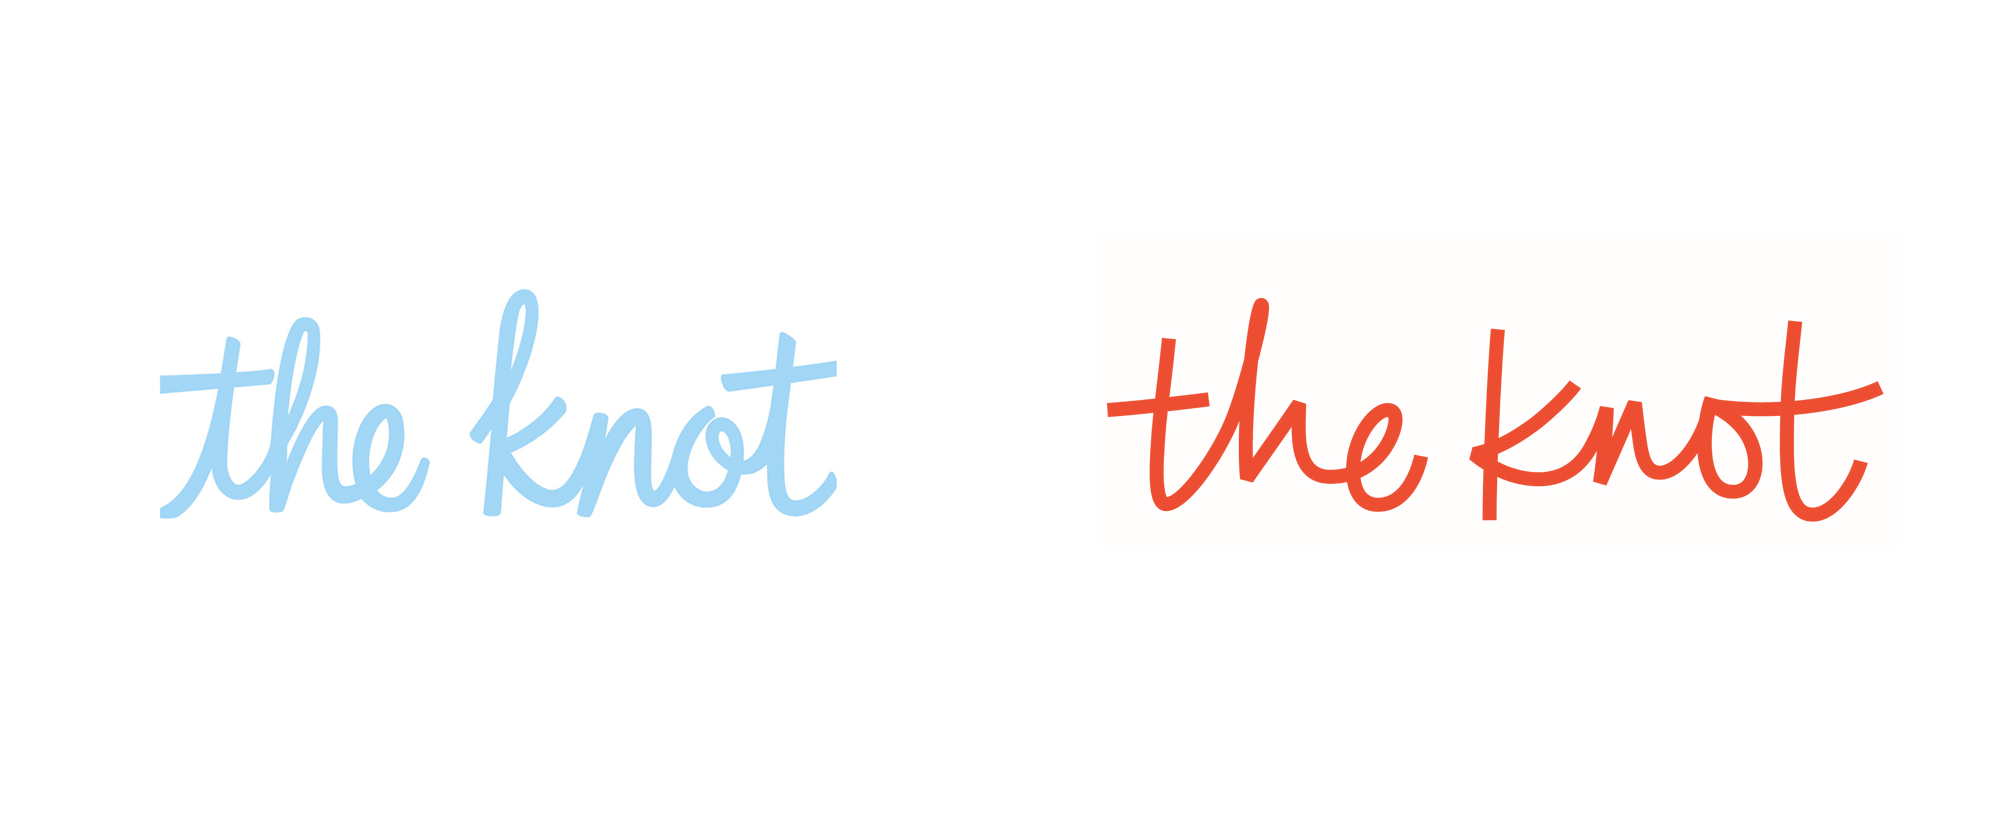 Theknot.com Logo - Brand New: New Logo and Identity for The Knot by Pentagram